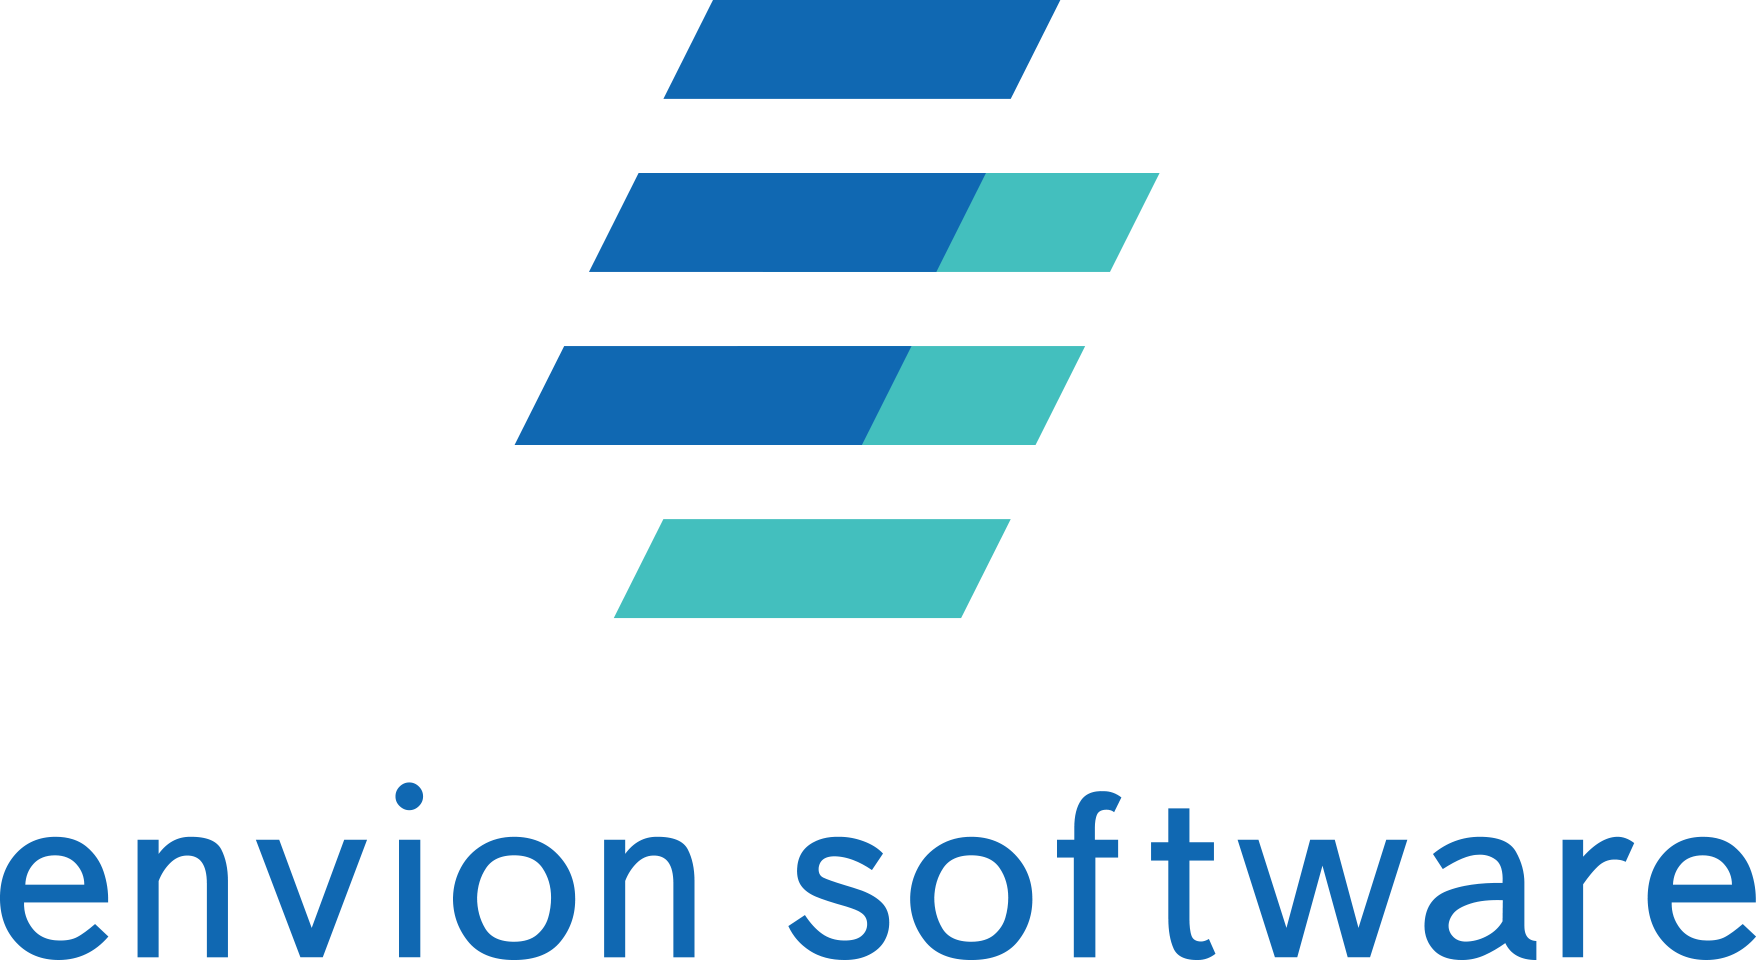 Envion Software profile on Qualified.One